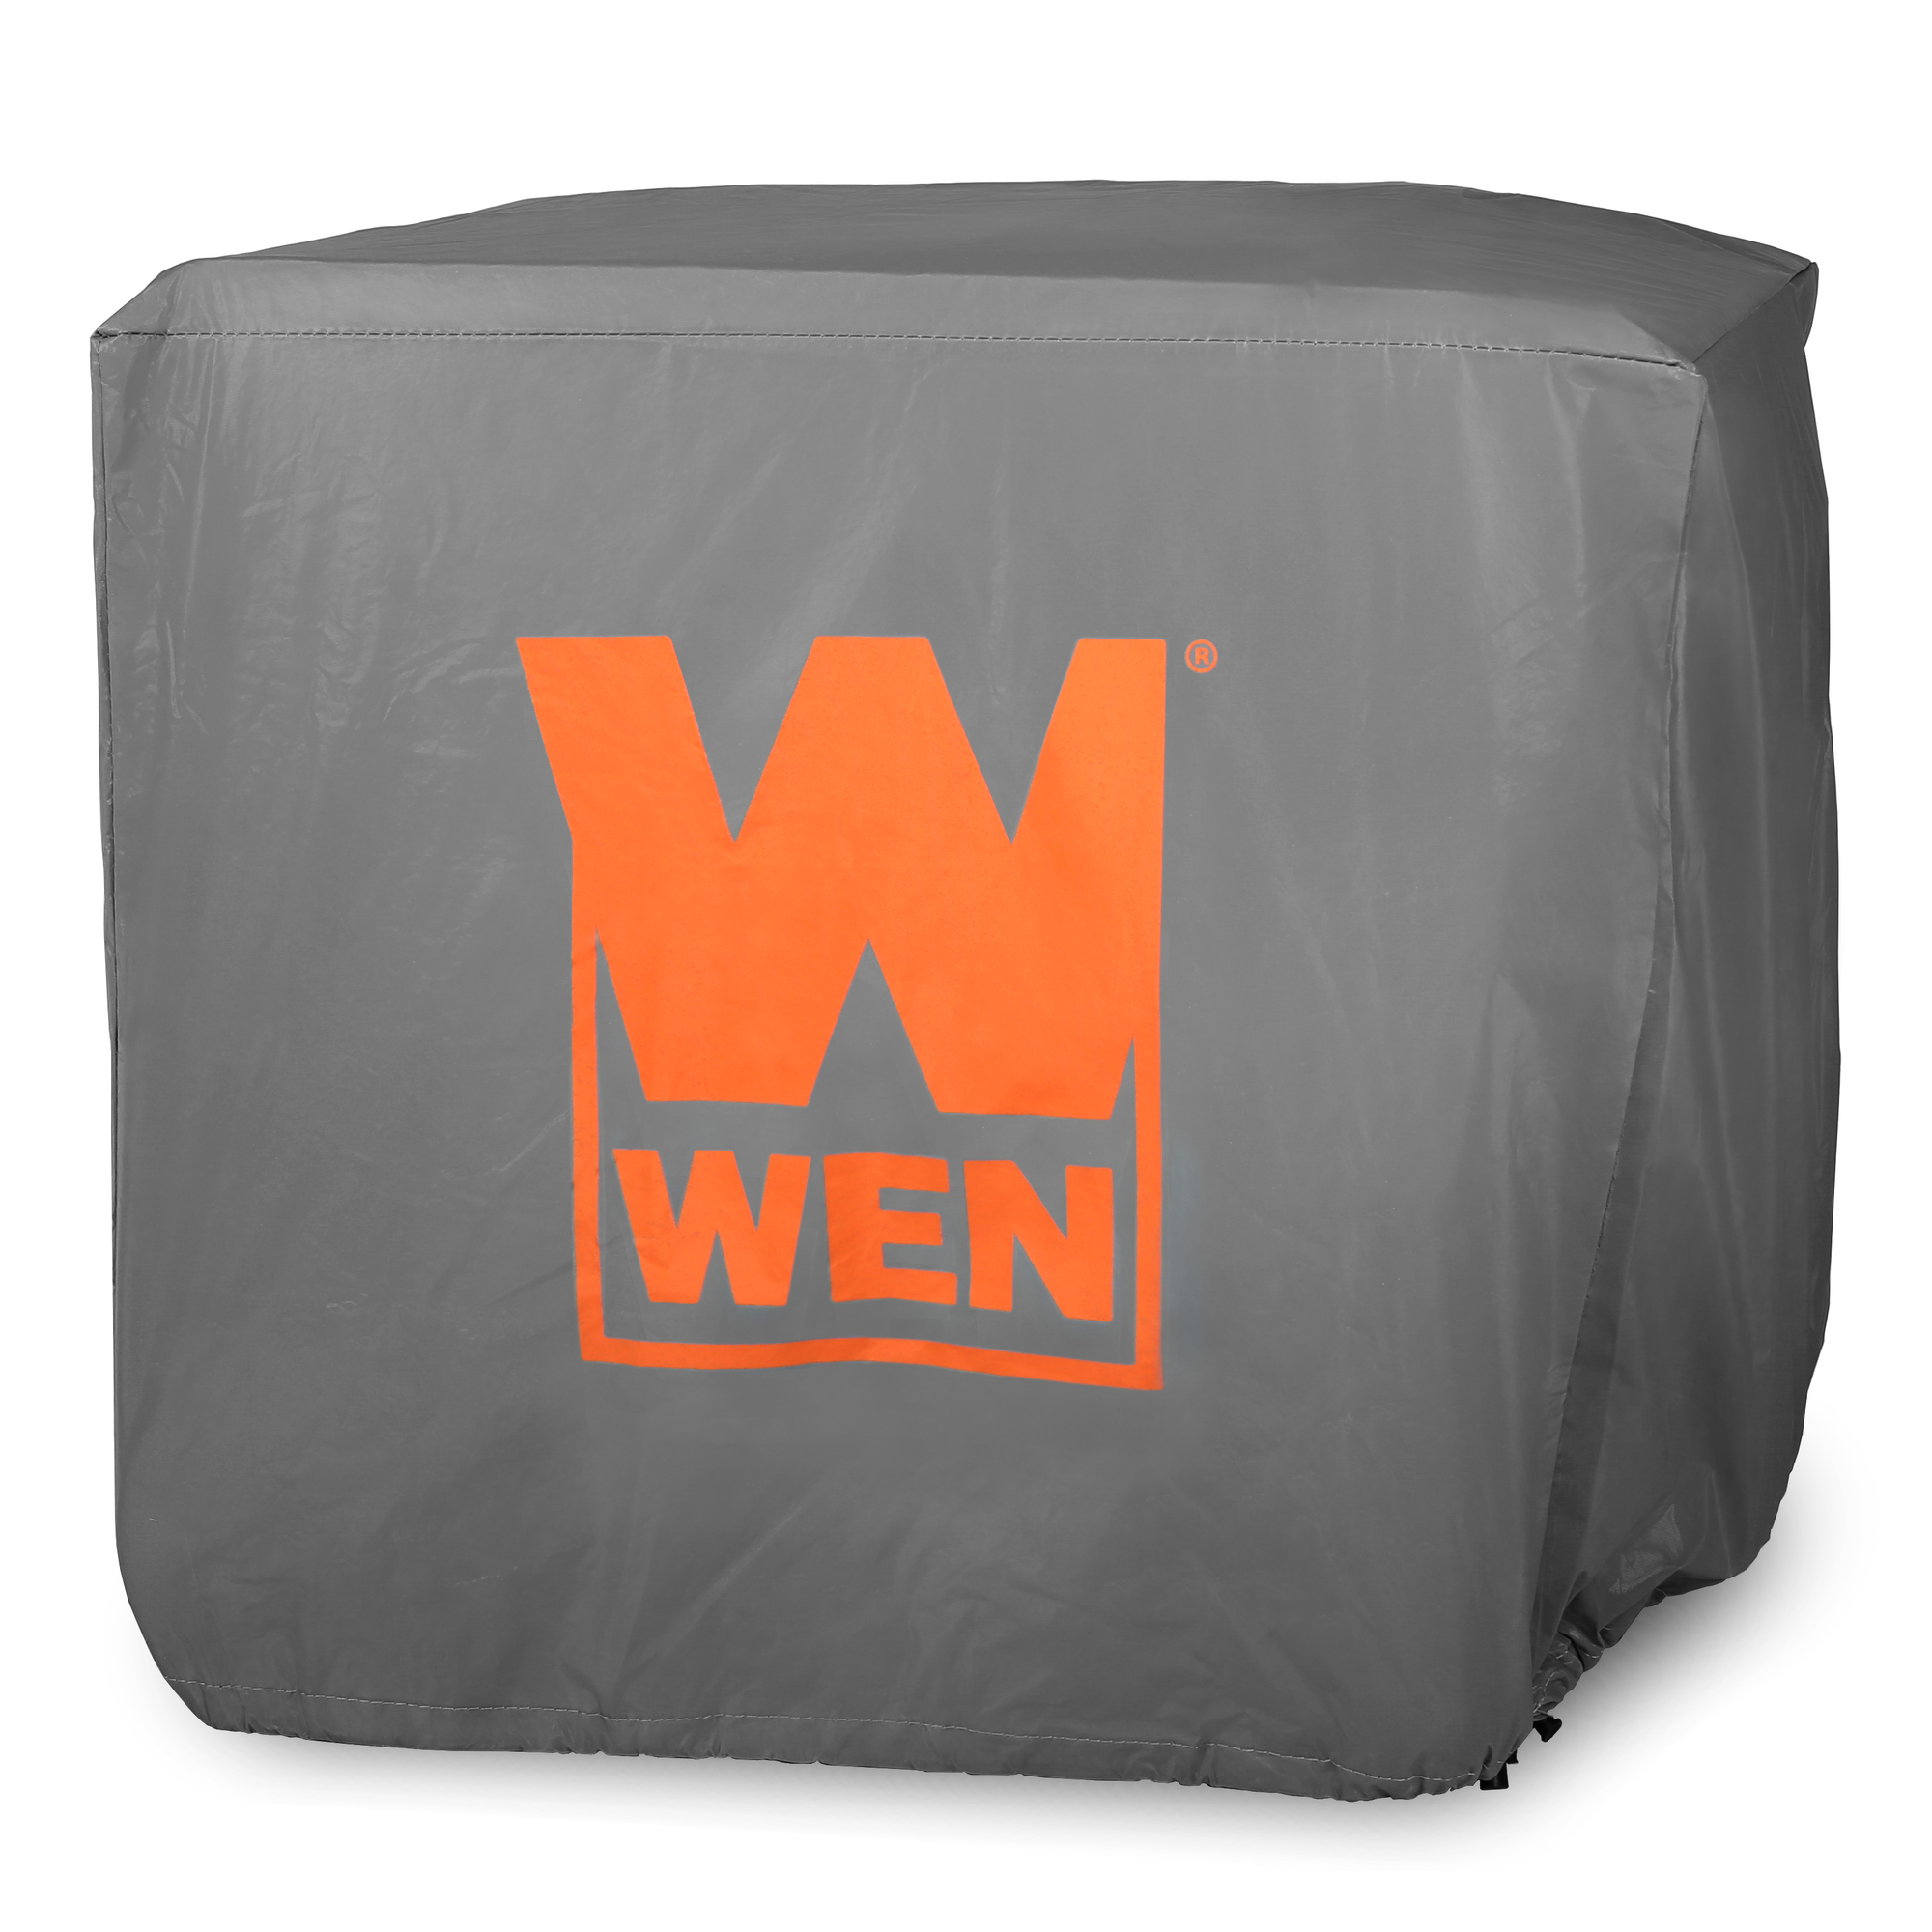 WEN, Weatherproof Generator Cover, Material Vinyl, Closure Type Other, Compatible With Other, Model GNC235